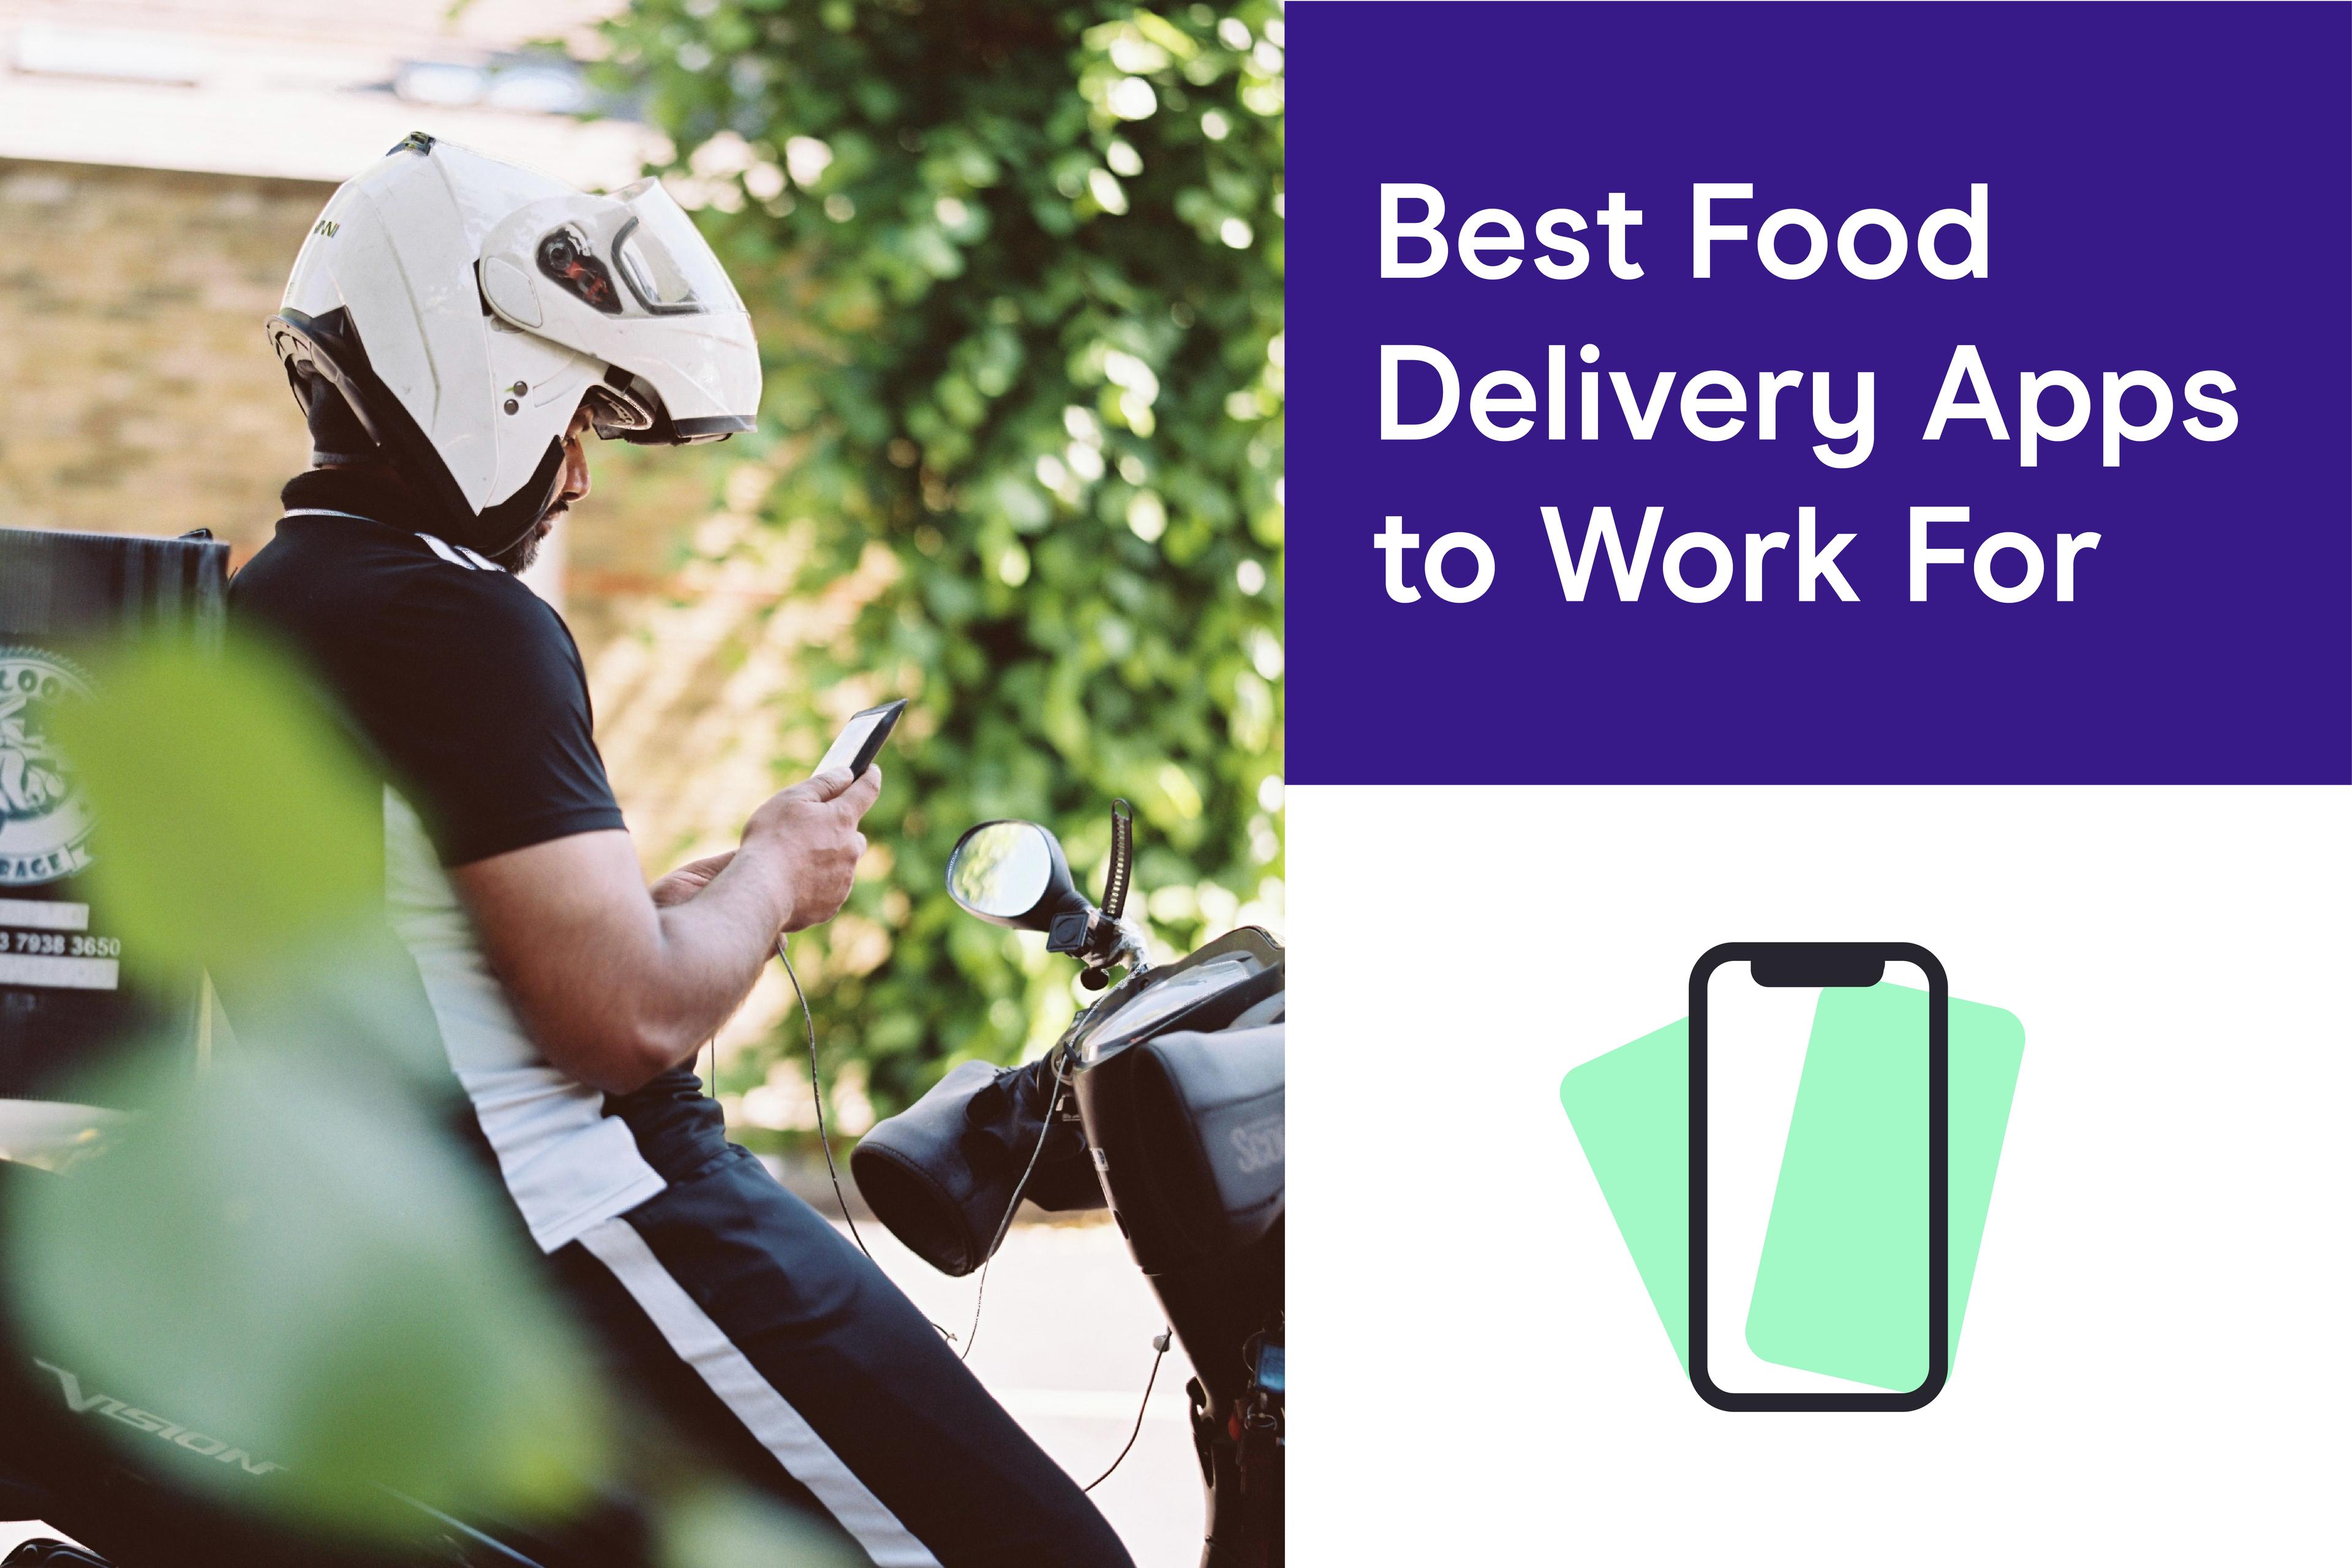 best food delivery company apps to work for